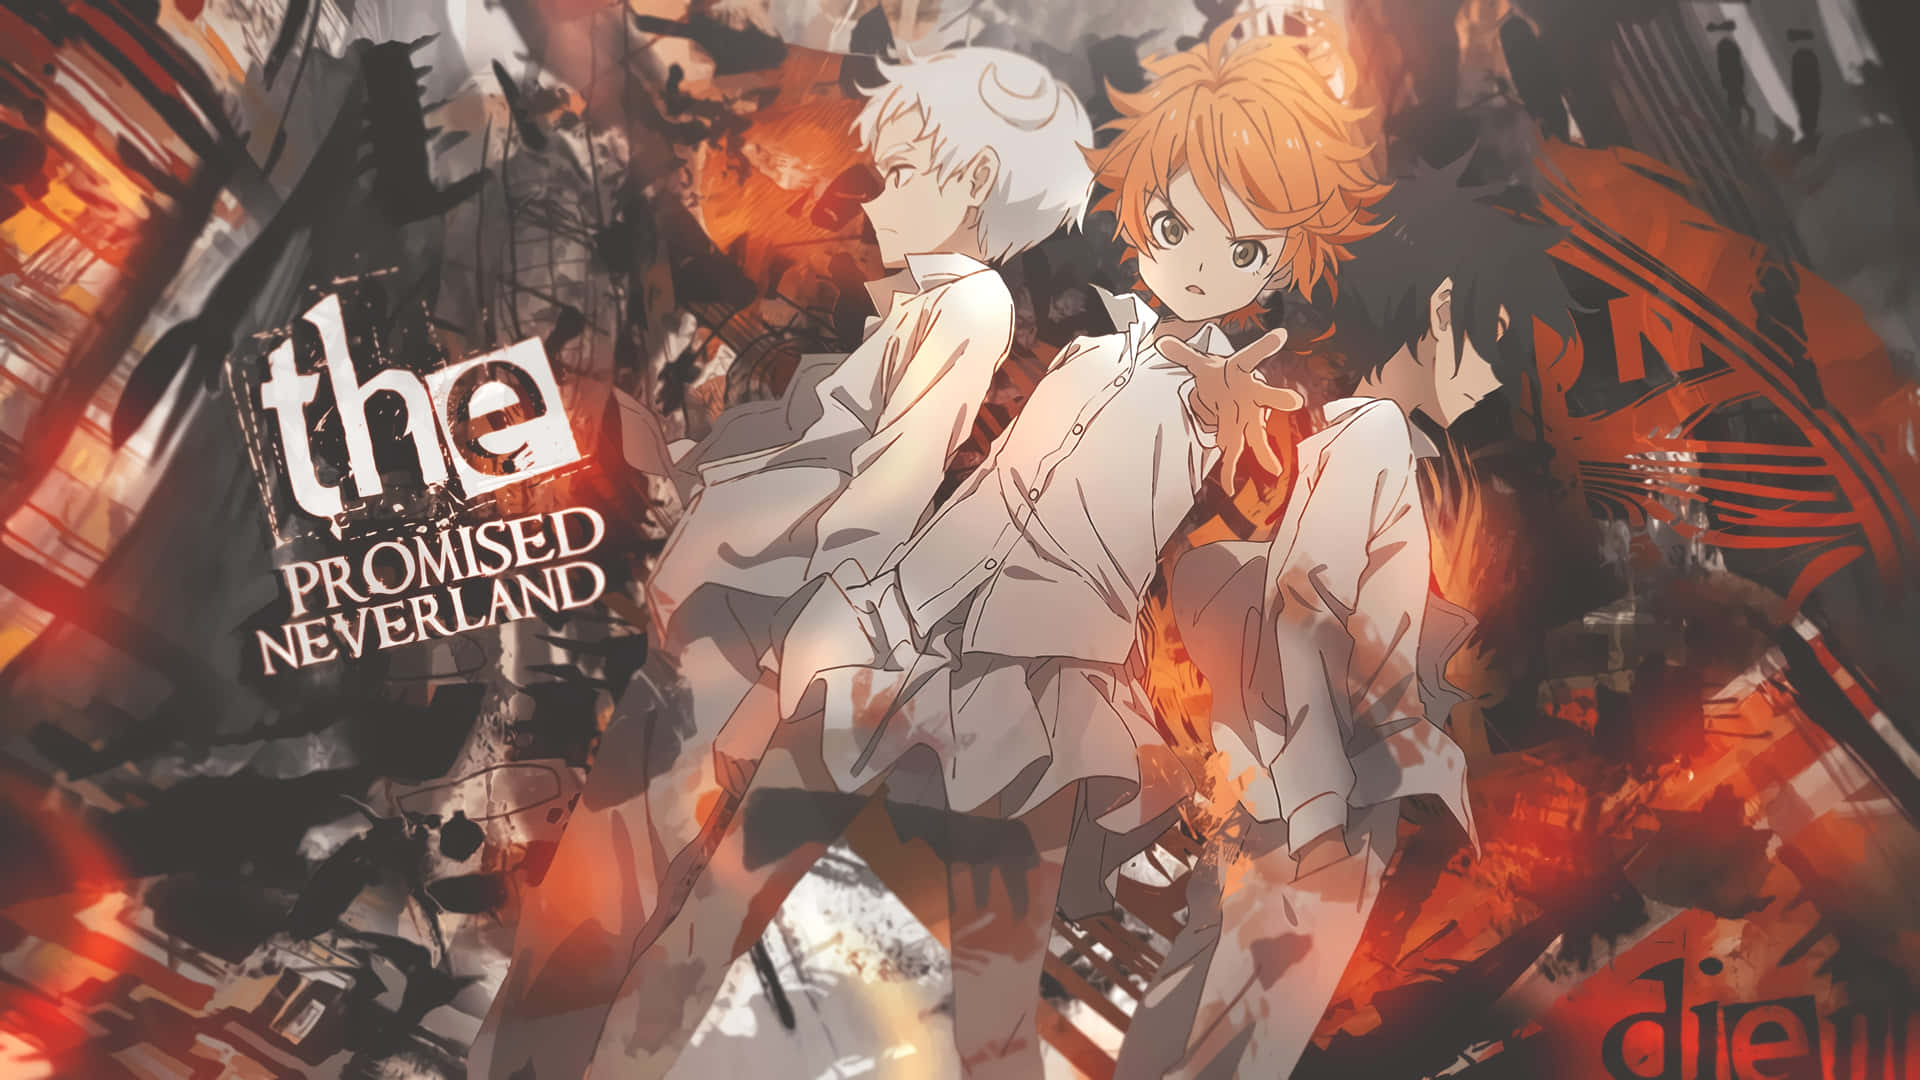 The Promised Neverland's Emma in a stunning widescreen wallpaper Wallpaper